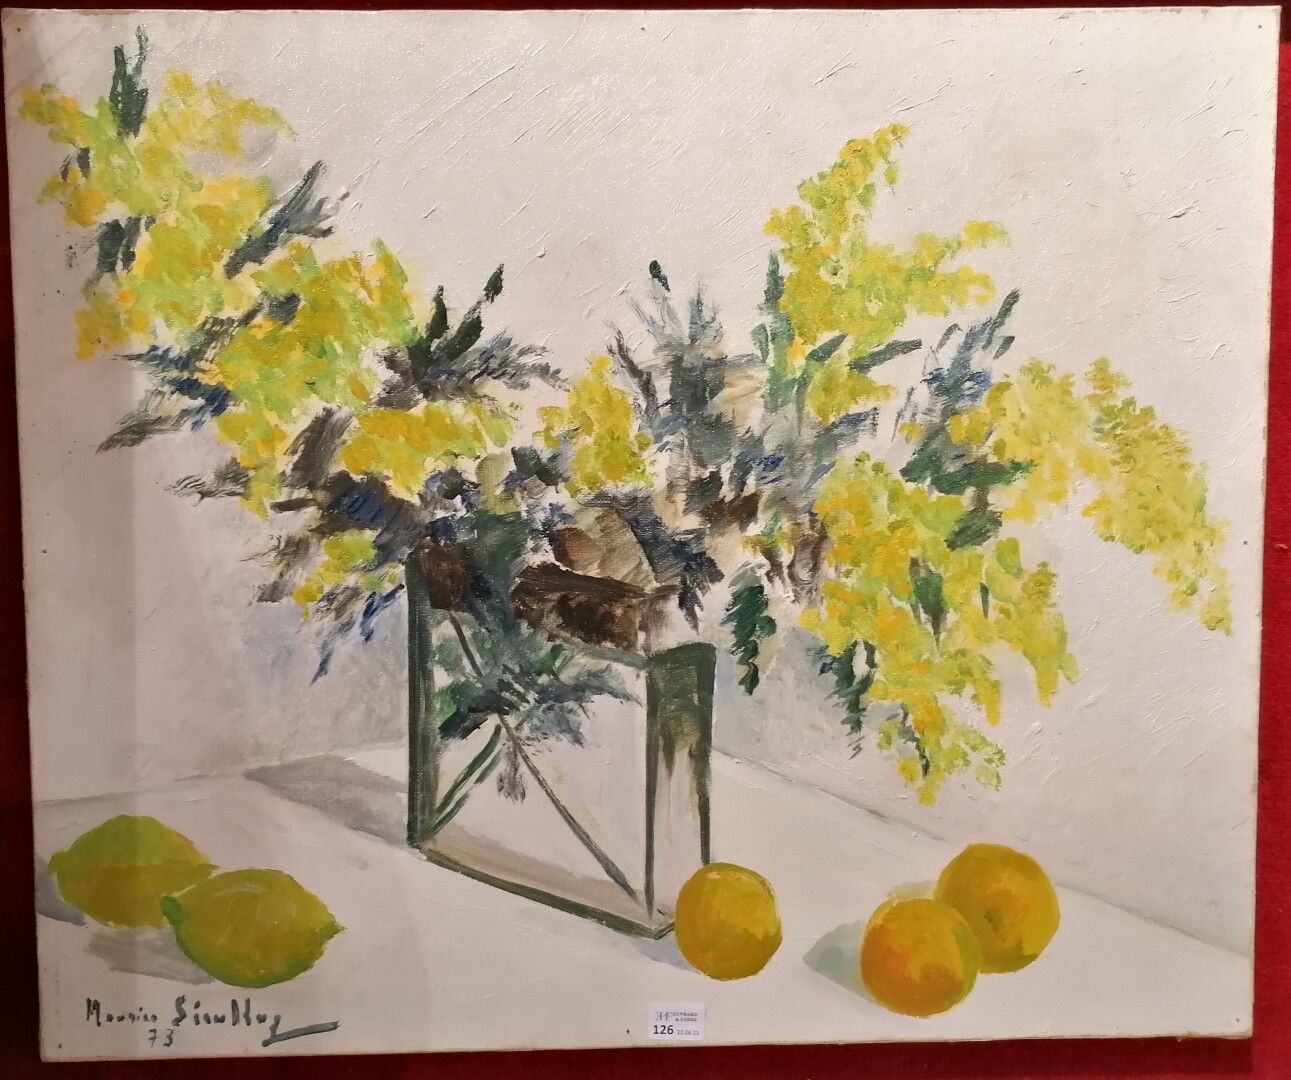 Null Maurice SERULLAZ (1914-1997)

Still life with lemon and mimosas

Oil on can&hellip;